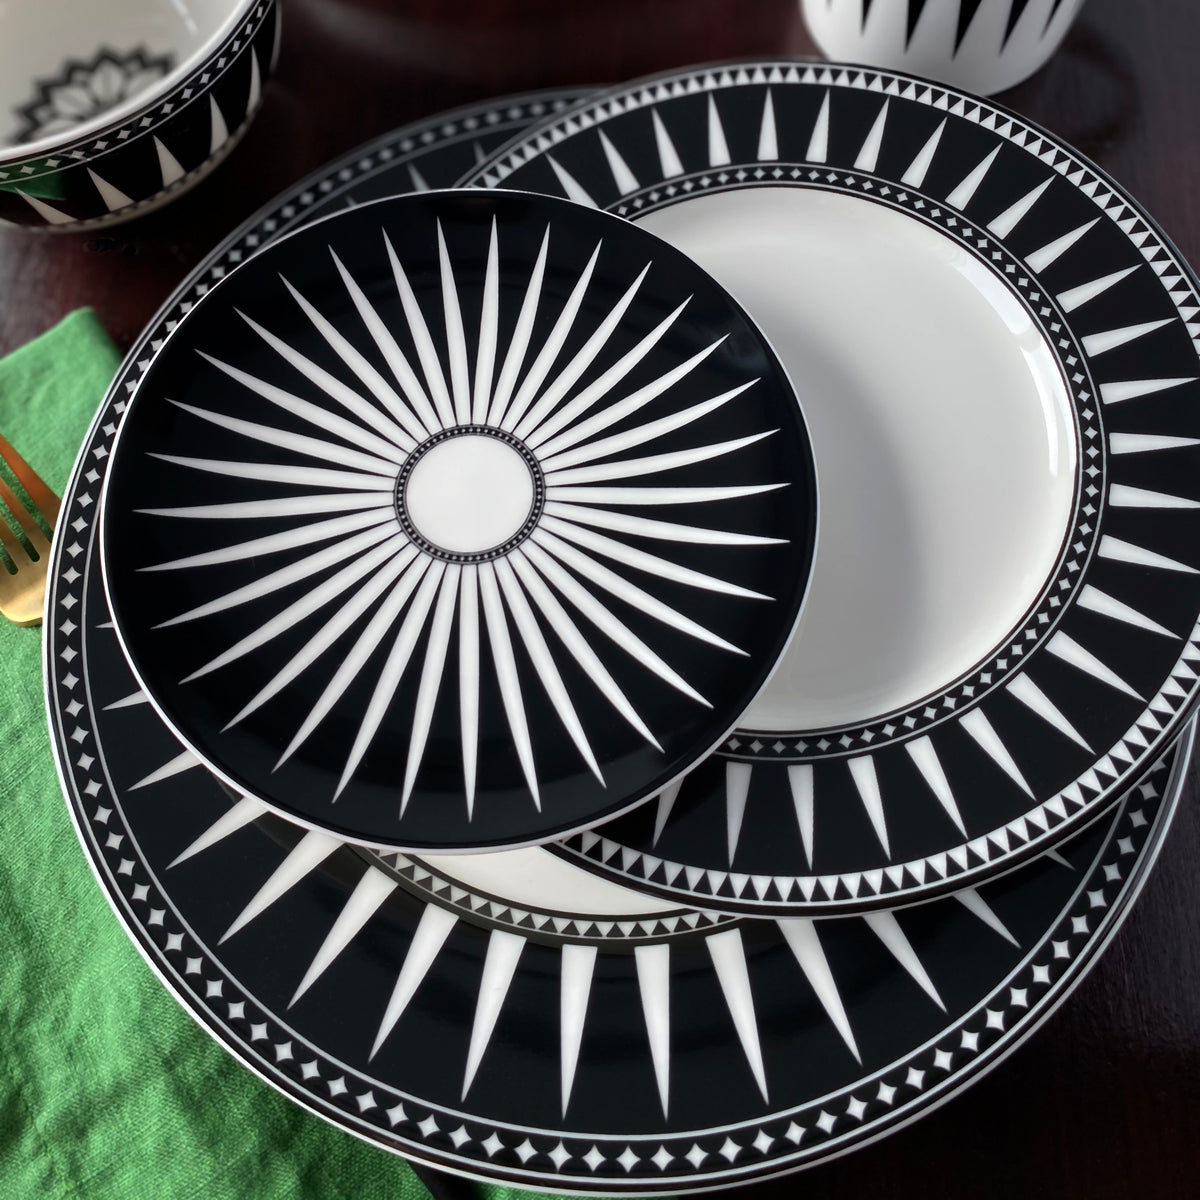 A stack of black and white Marrakech Rimmed Dinner Plates by Caskata Artisanal Home with geometric patterns is placed on a dark wooden surface beside a green cloth napkin and a fork.